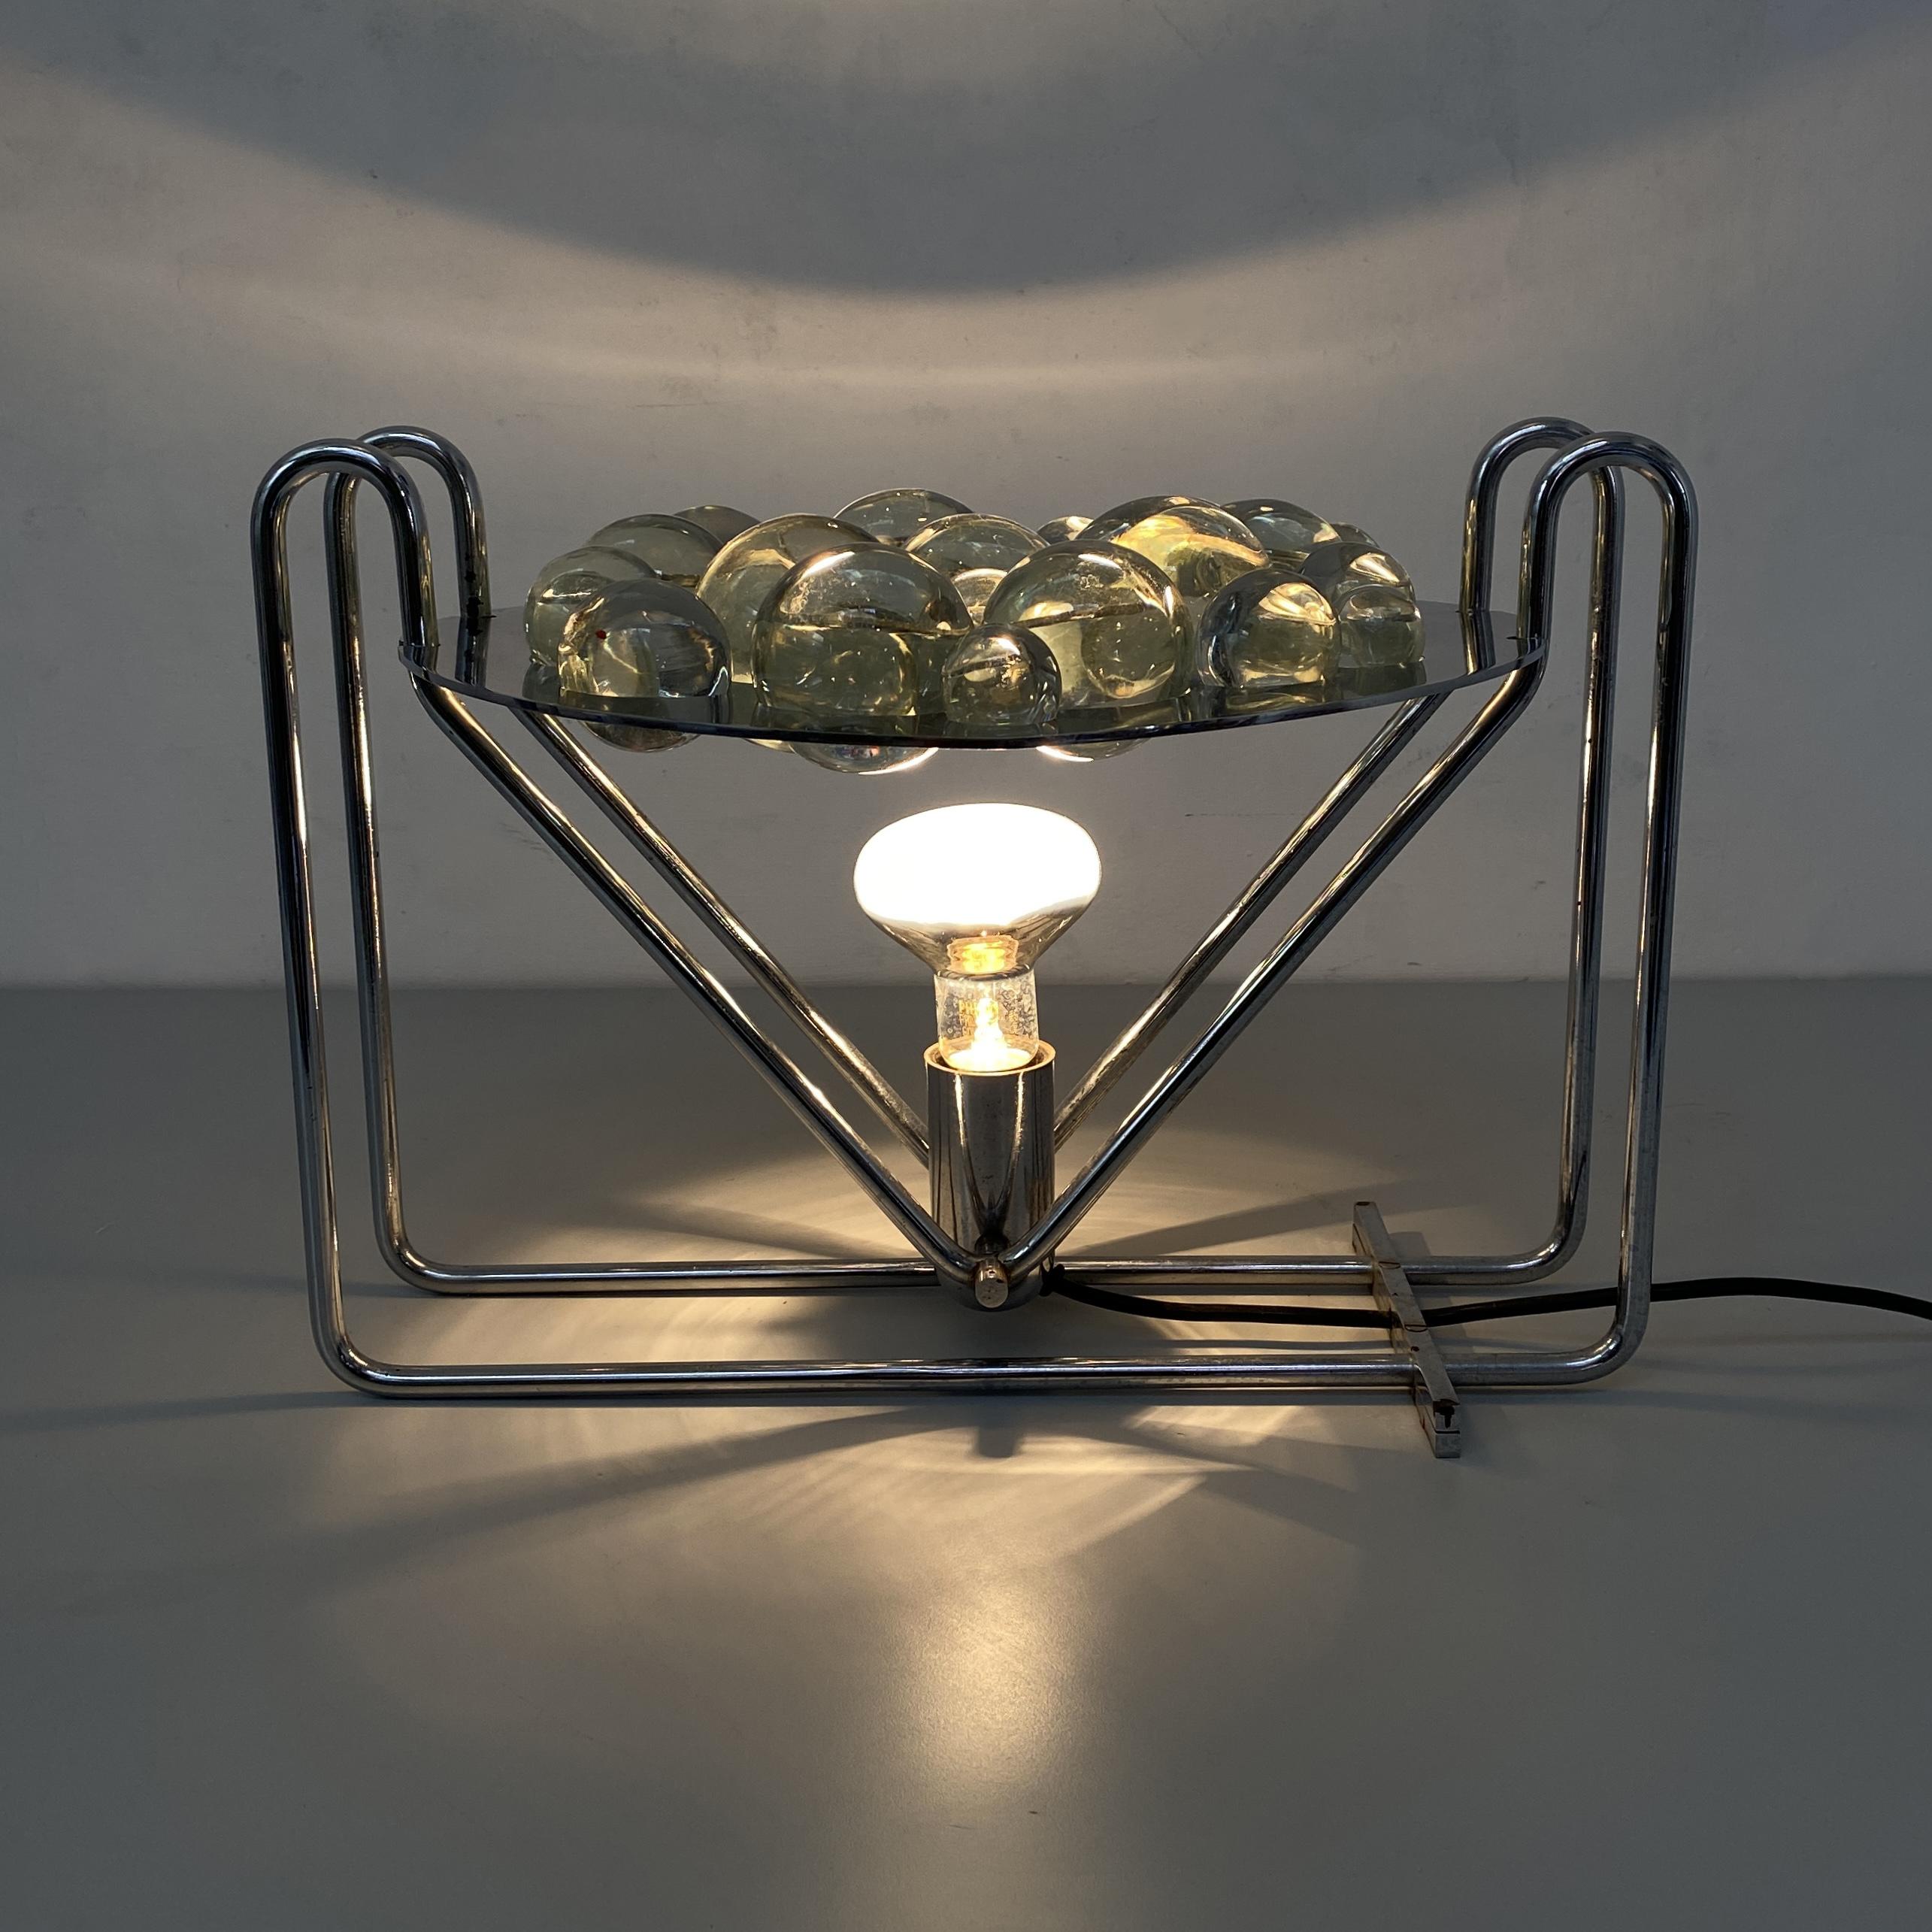 Metal Italian Mid-Century Chrome Table Lamp with Glass Spheres, 1970s